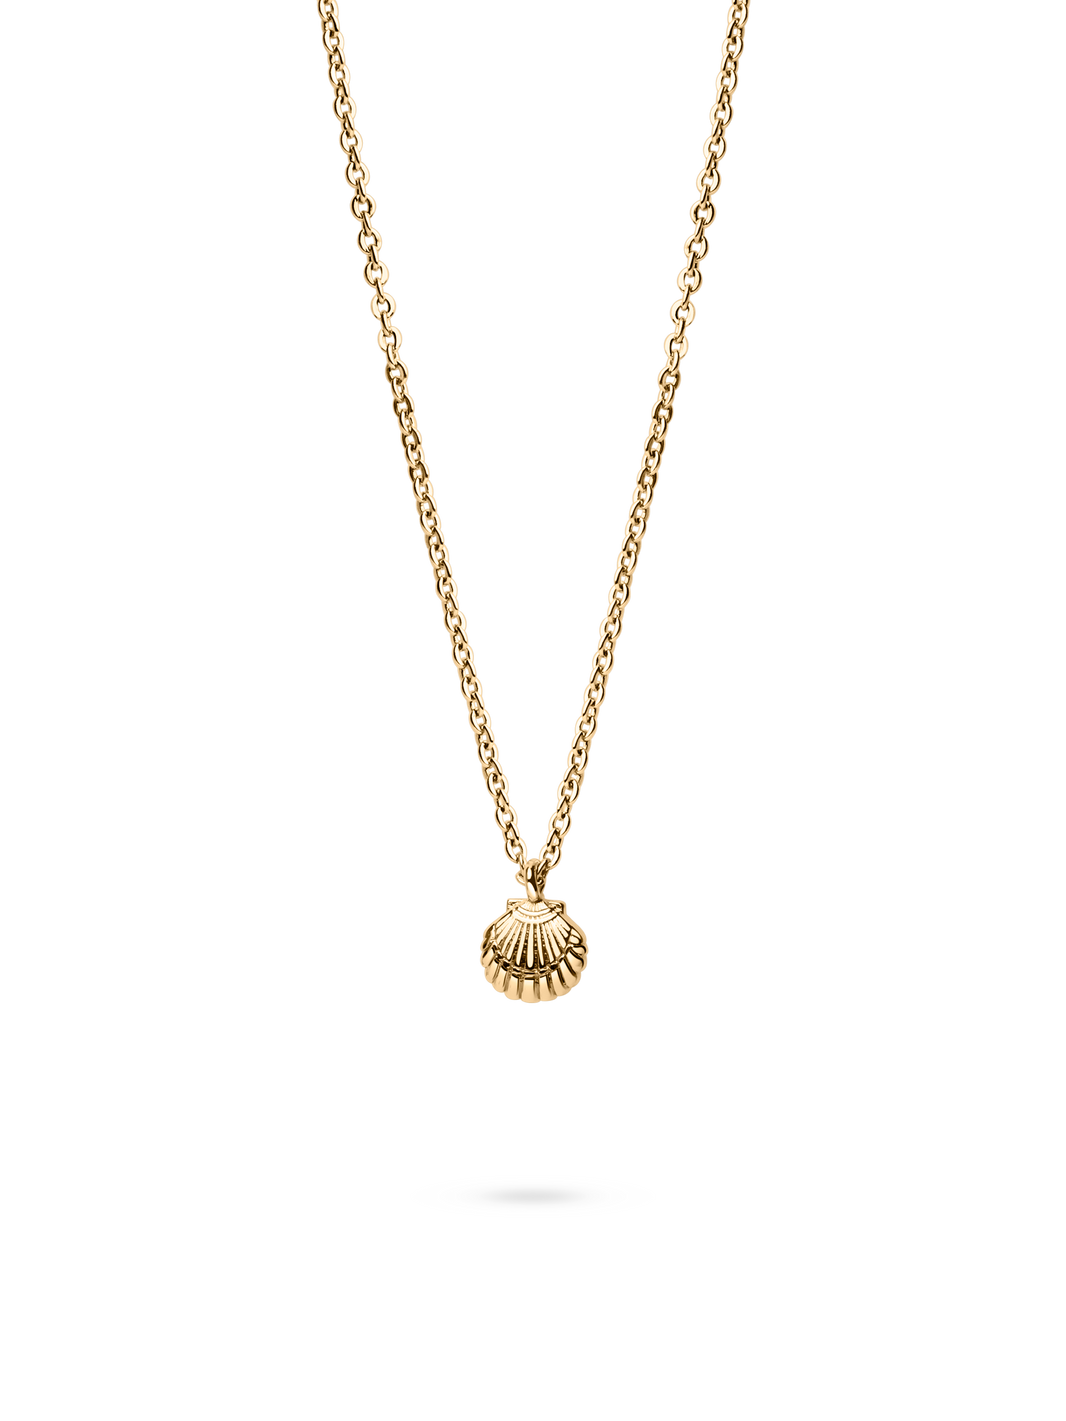 seashell necklace 18k gold plated brass